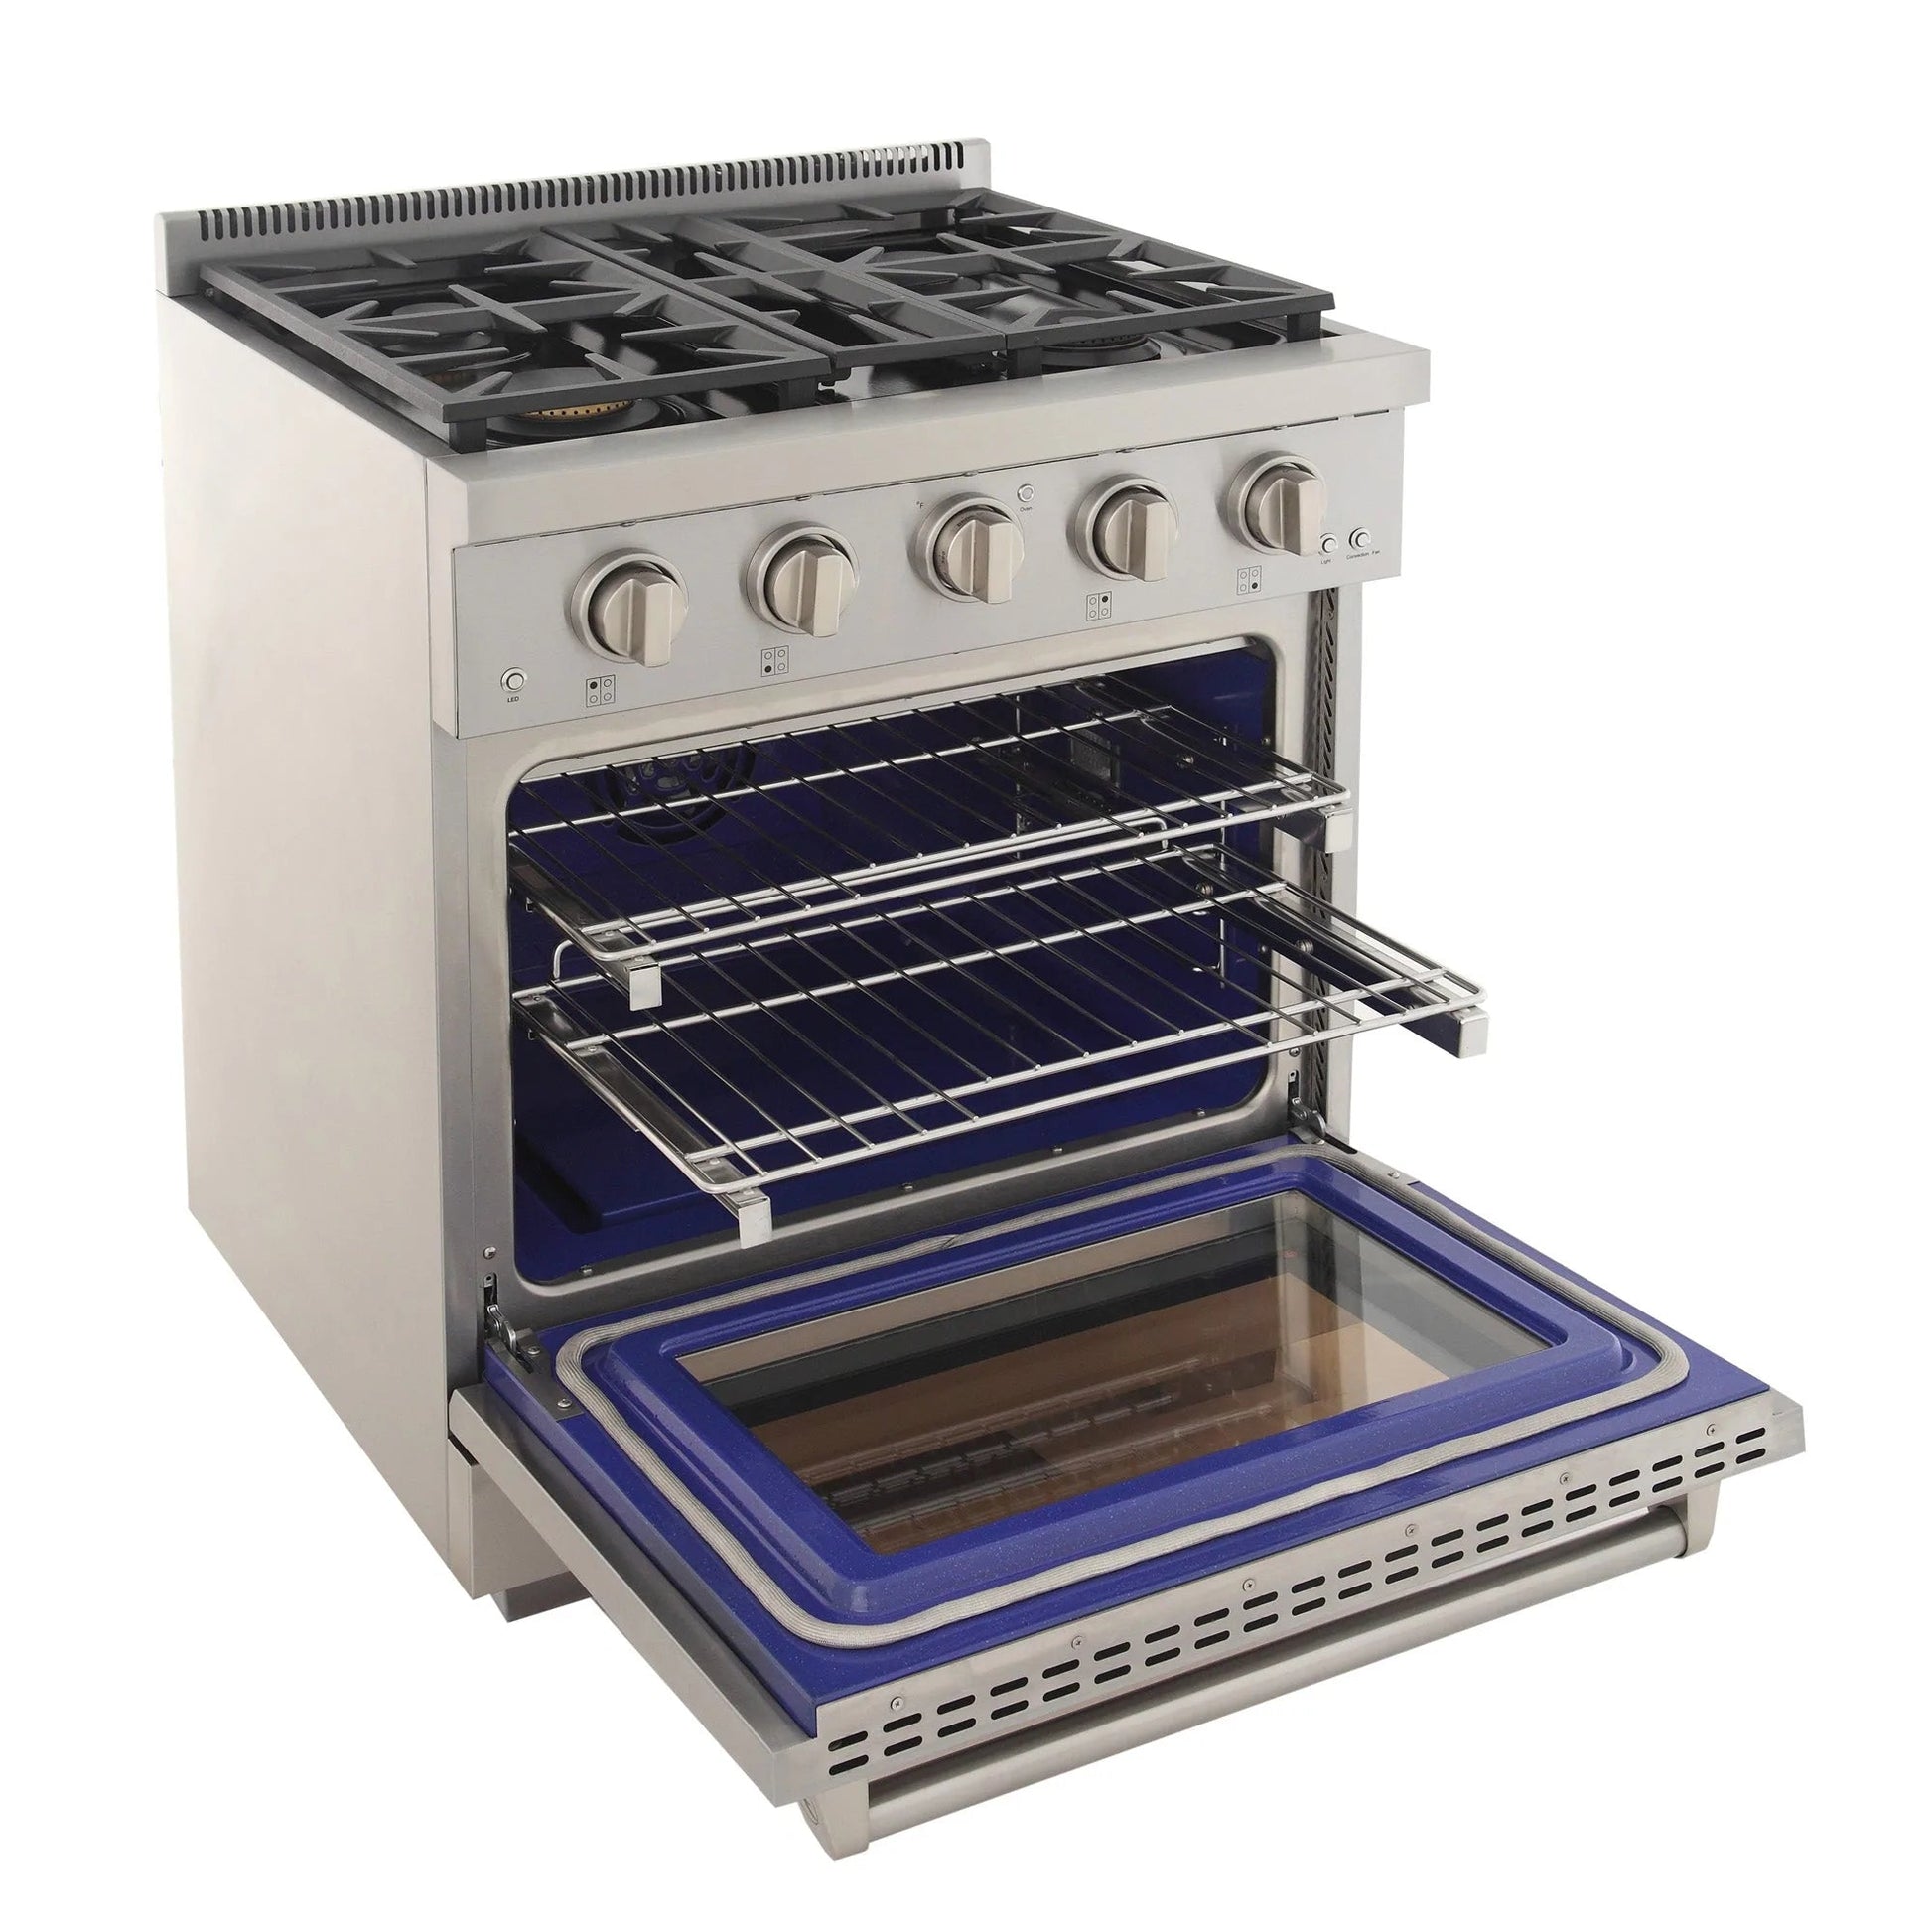 Kucht KFX Series 30" Freestanding Propane Gas Range With 4 Burners and Royal Blue Knobs